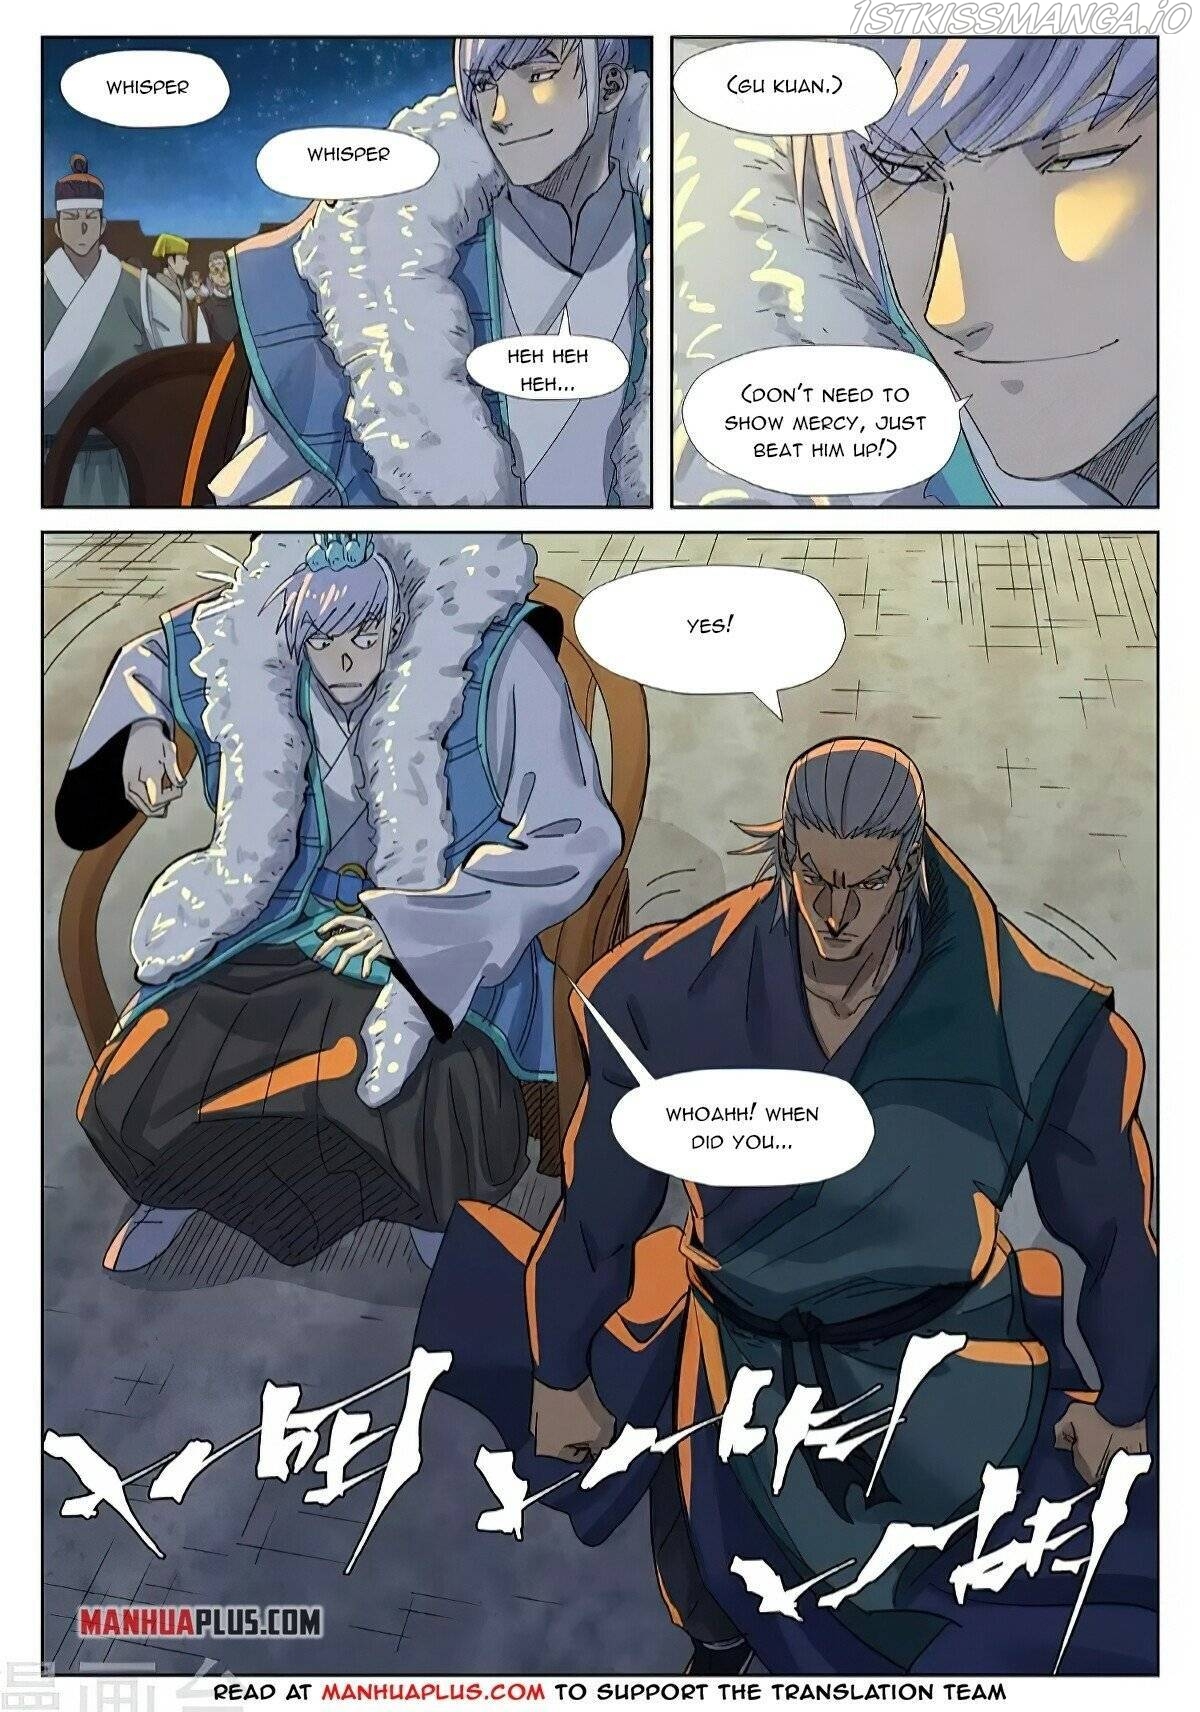 Tales of Demons and Gods Manhua Chapter 349.1 - Page 6